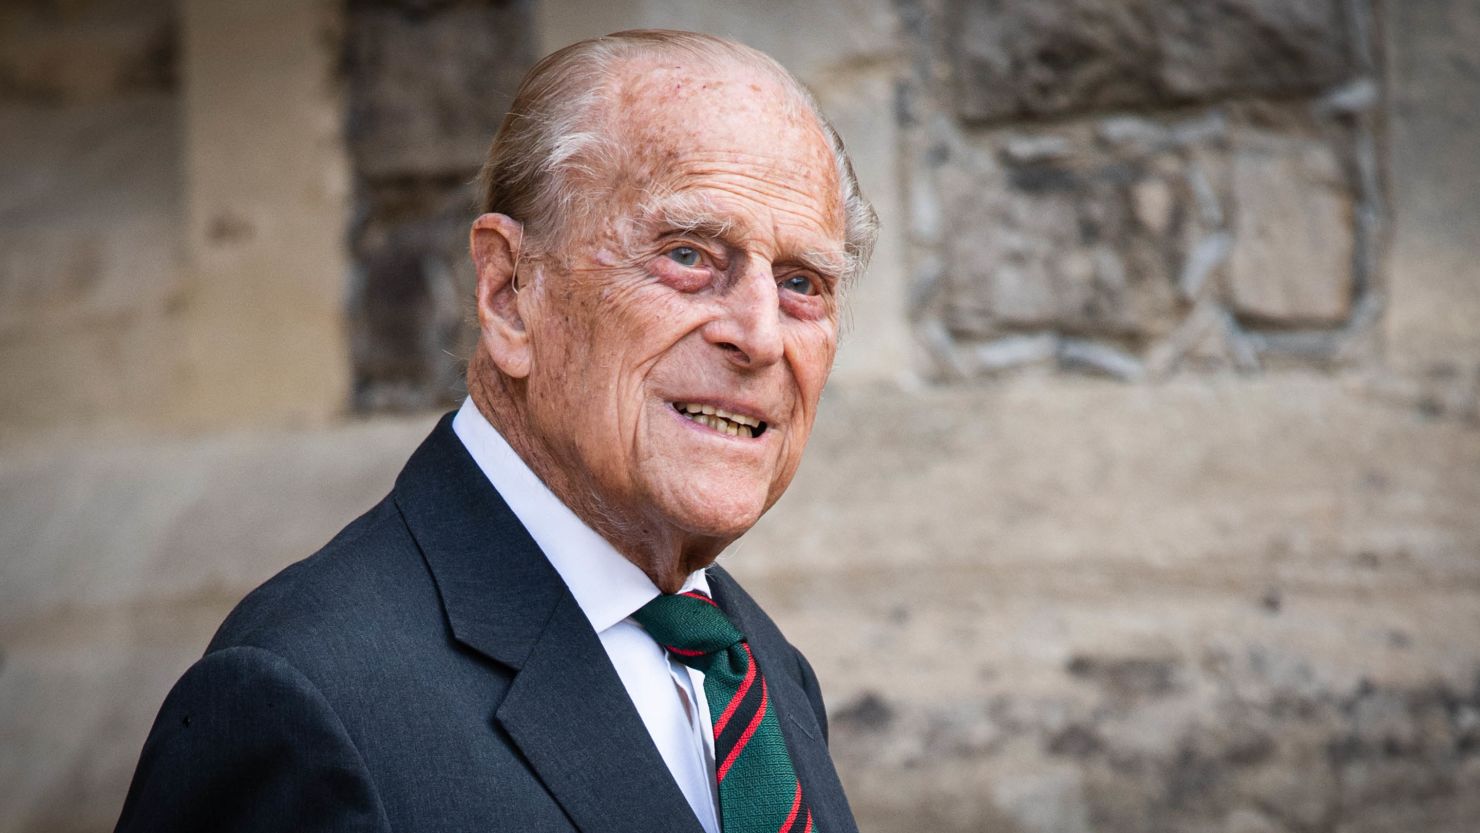 Prince Philip, Duke of Edinburgh, pictured here in July 2020, has spent a second night in hospital after being admitted as a "precautionary measure."